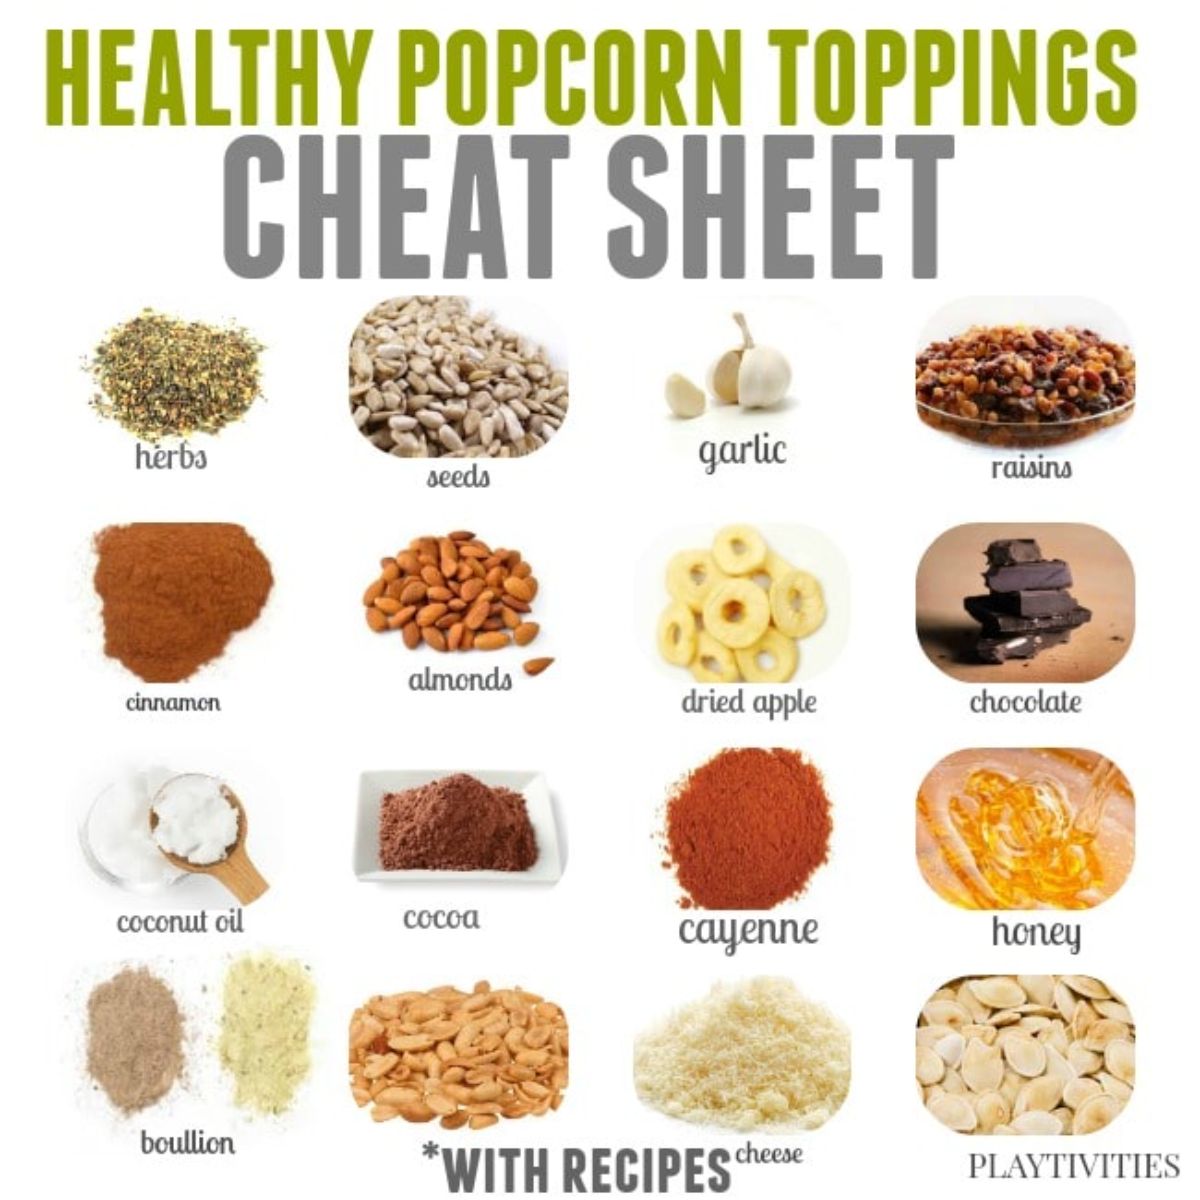 A sheet with 16 different images of popcorn toppings. Herbs, seeds, garlic, raisins, cinnamon, almonds, dried apple, chocolate, coconut oil, cocoa, cayenne, honey, bouillon, cheese